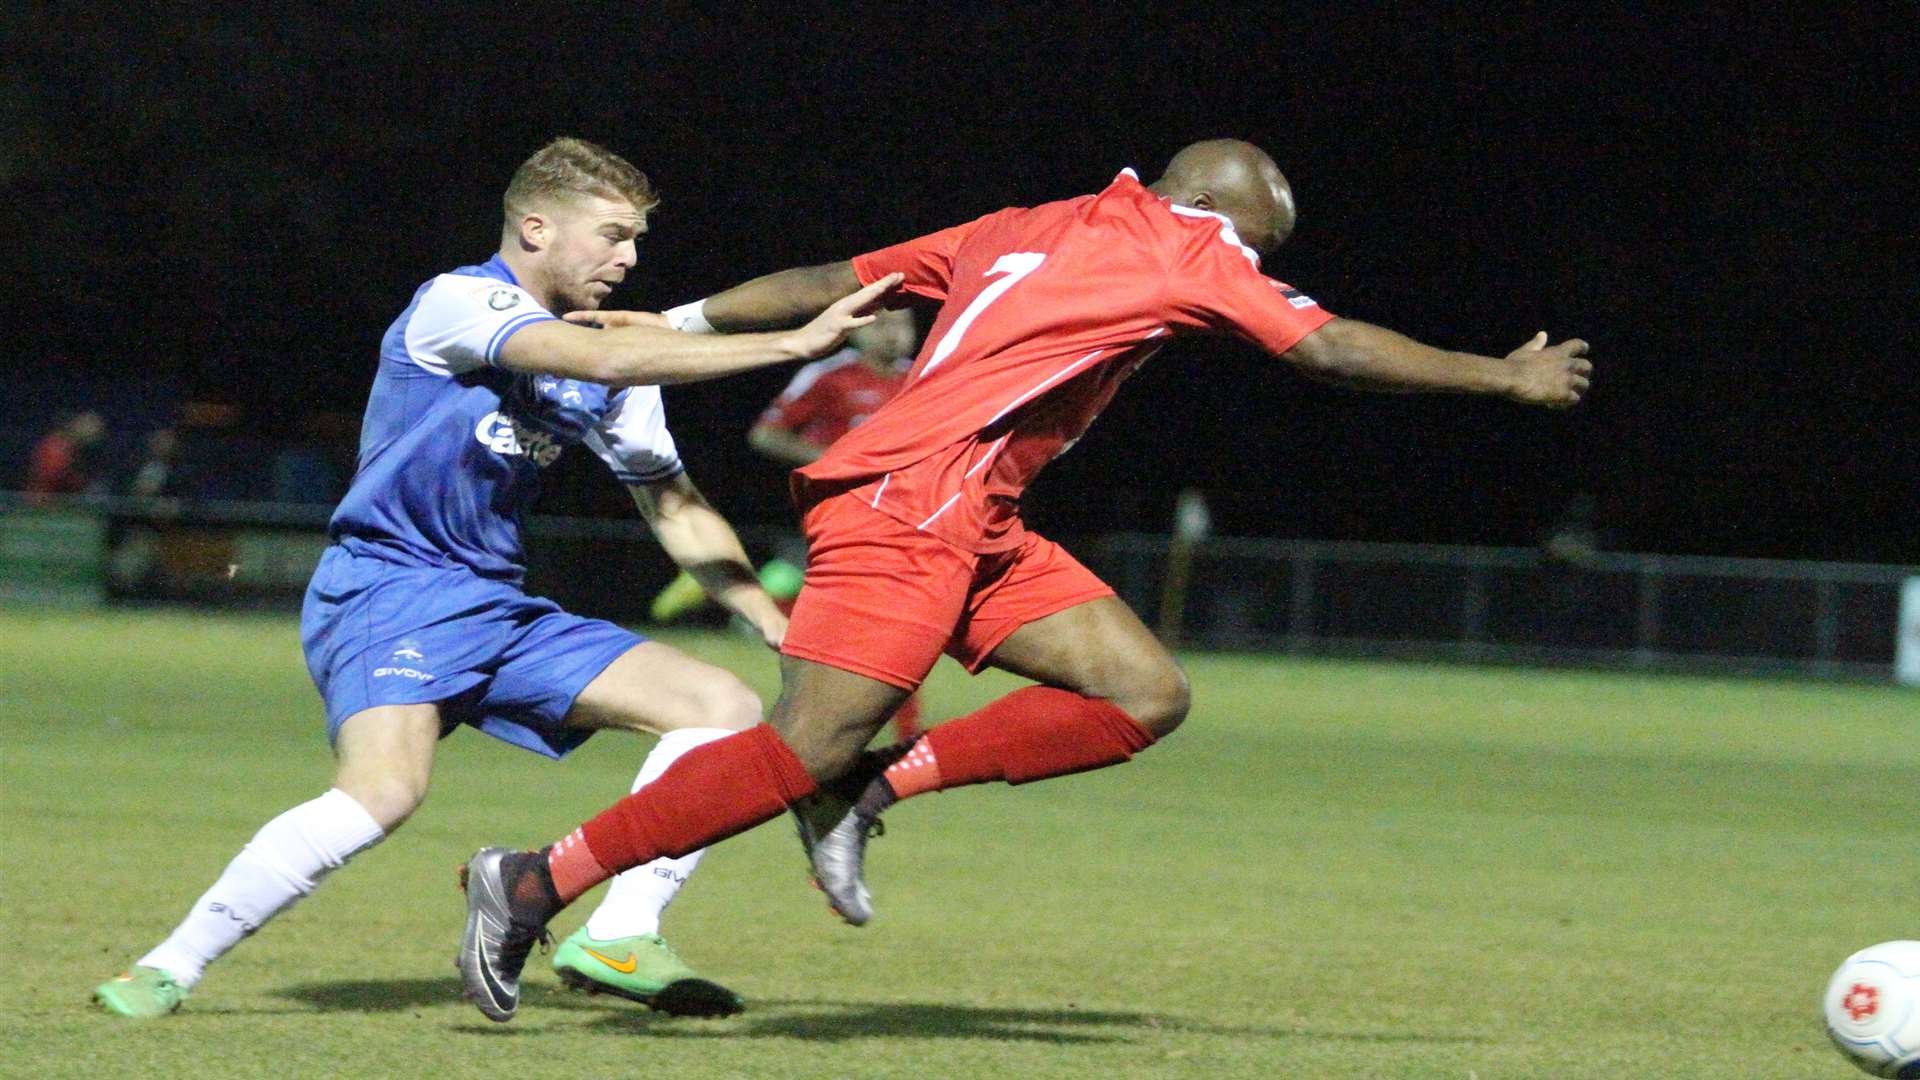 Margate's Alex Osborn battles for the ball against Harrow Borough on Tuesday Picture: Don Walker